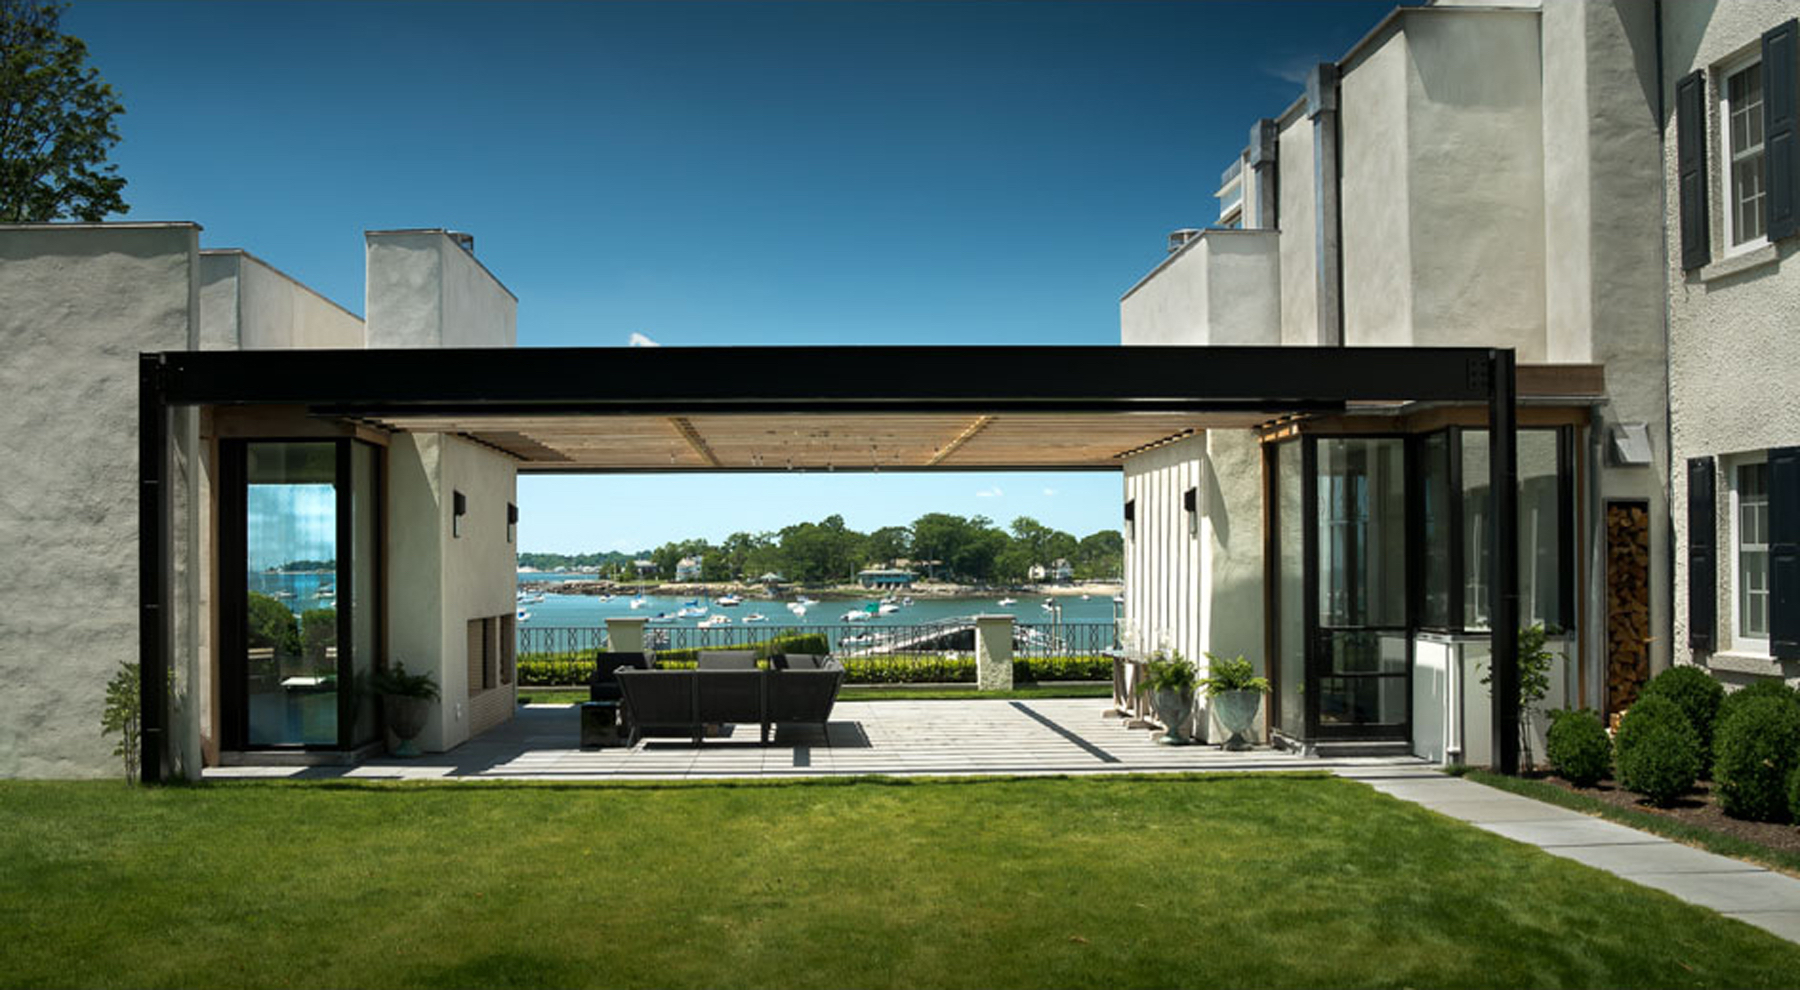 A Darien, CT waterfront constructed by Ben Krupinski Builder as designed by architect Michael Haverland. Photo: Michael Biondo